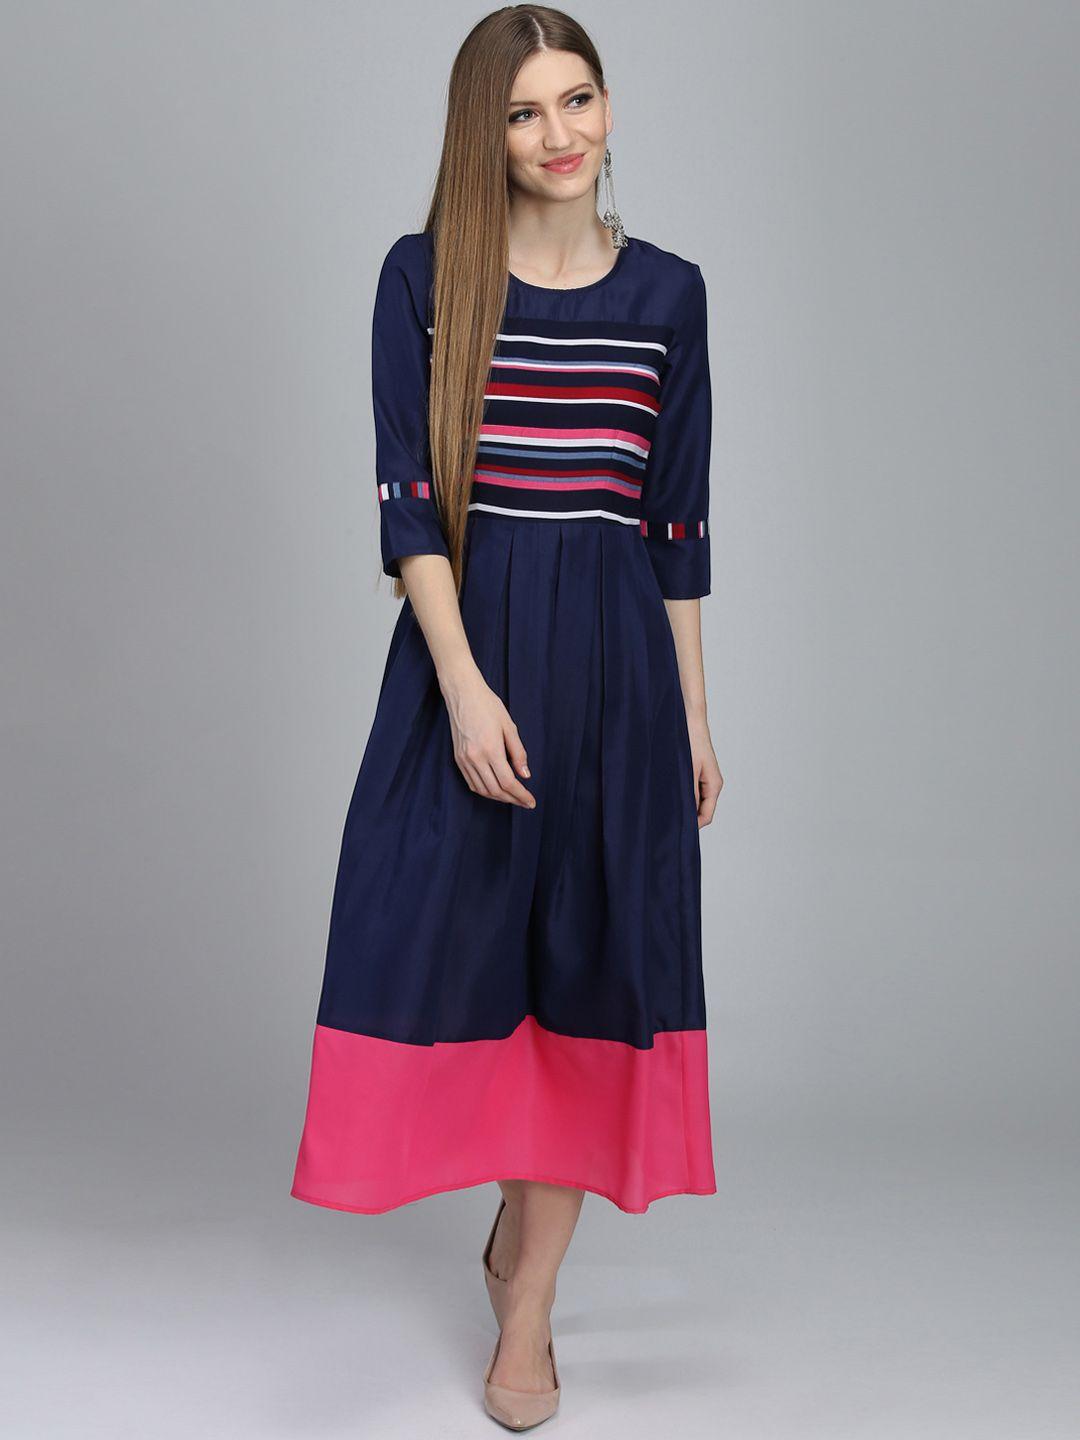 dodo & moa women navy blue striped fit and flare dress